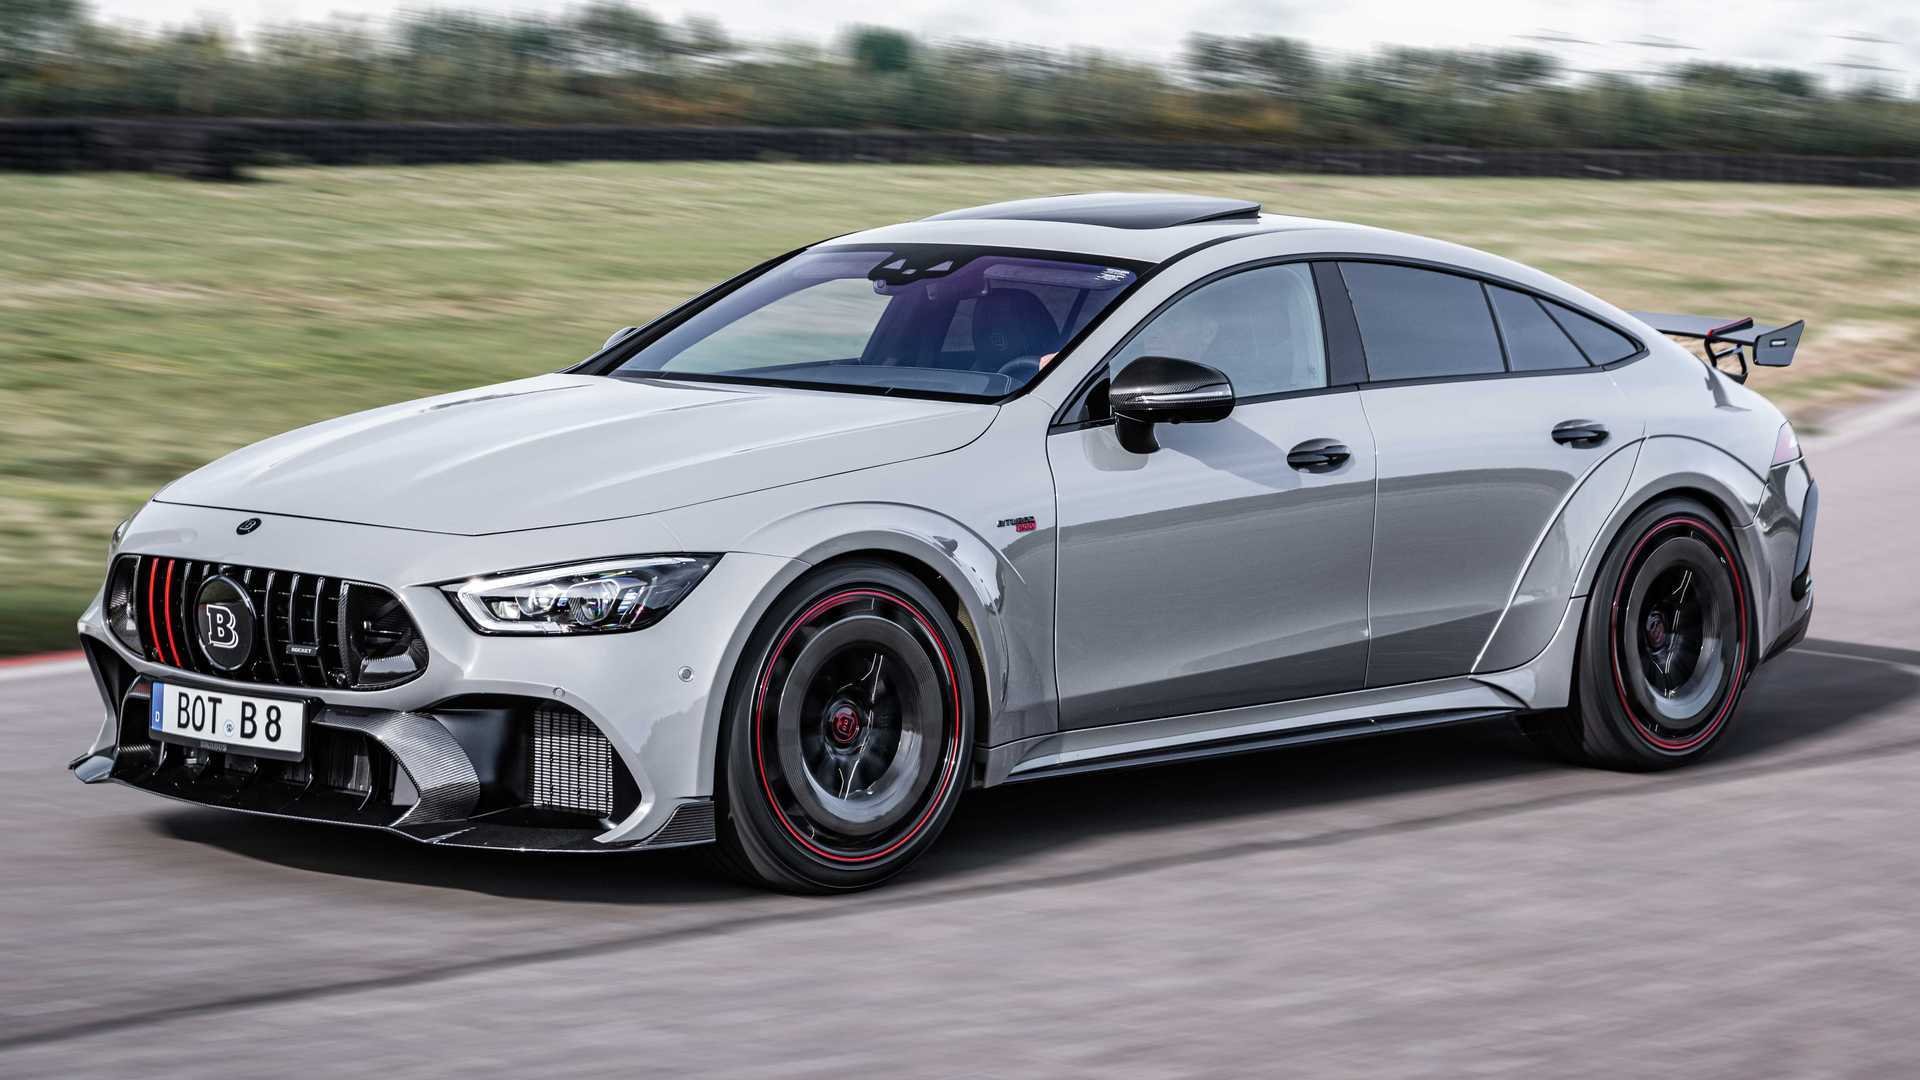 Brabus Rocket 900 Unleashed As Mercedes-AMG GT63 S With Mega Power